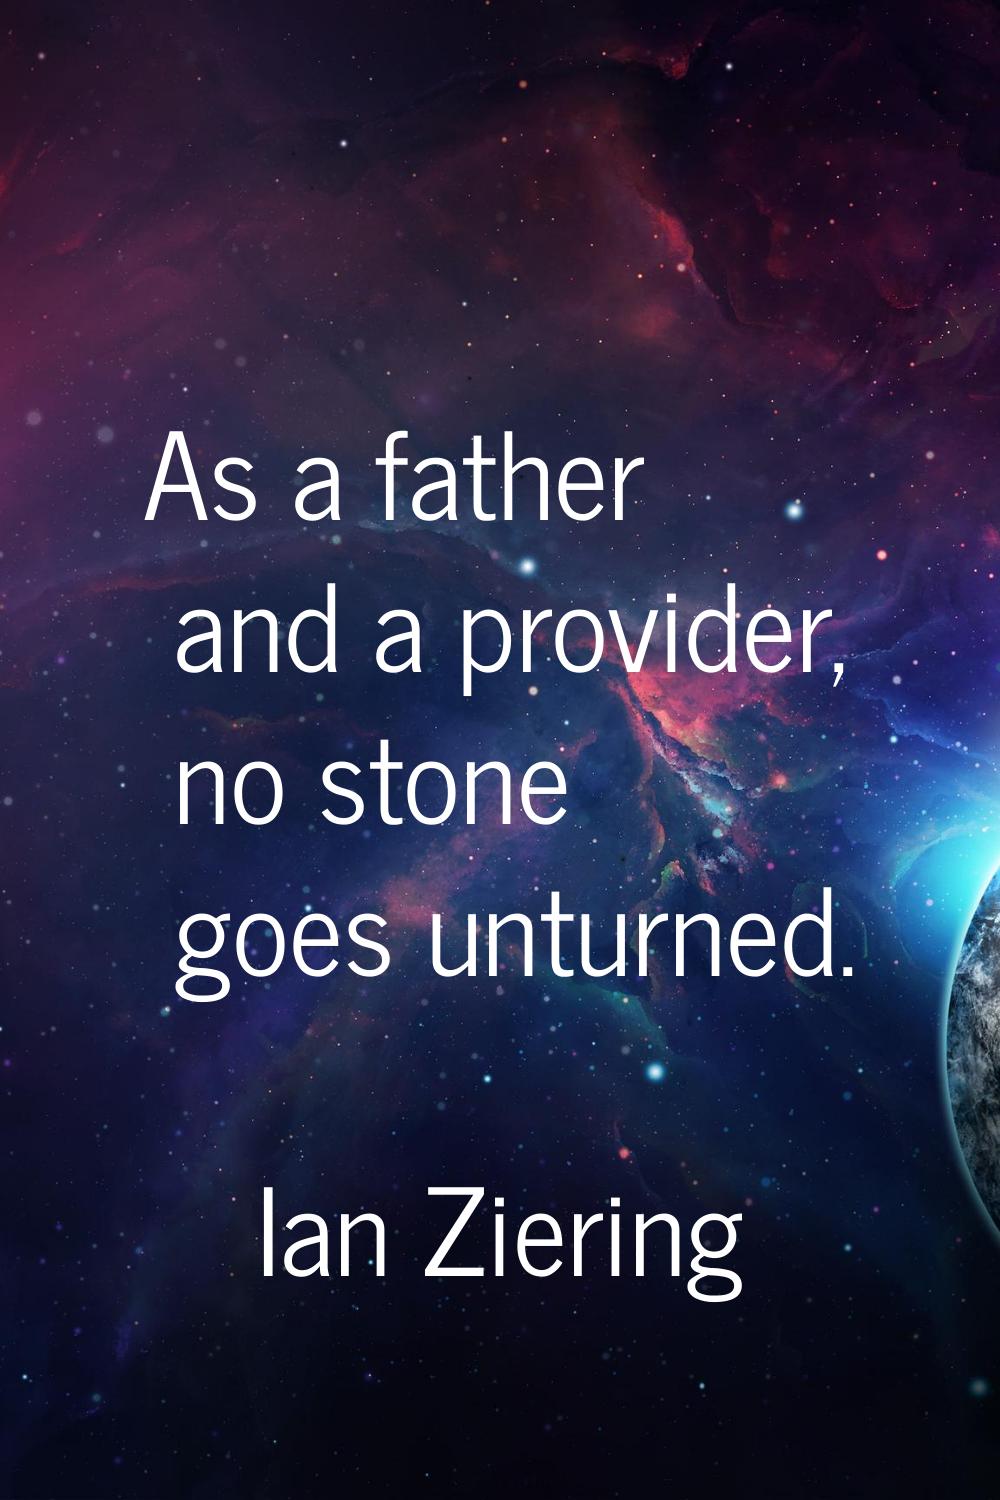 As a father and a provider, no stone goes unturned.